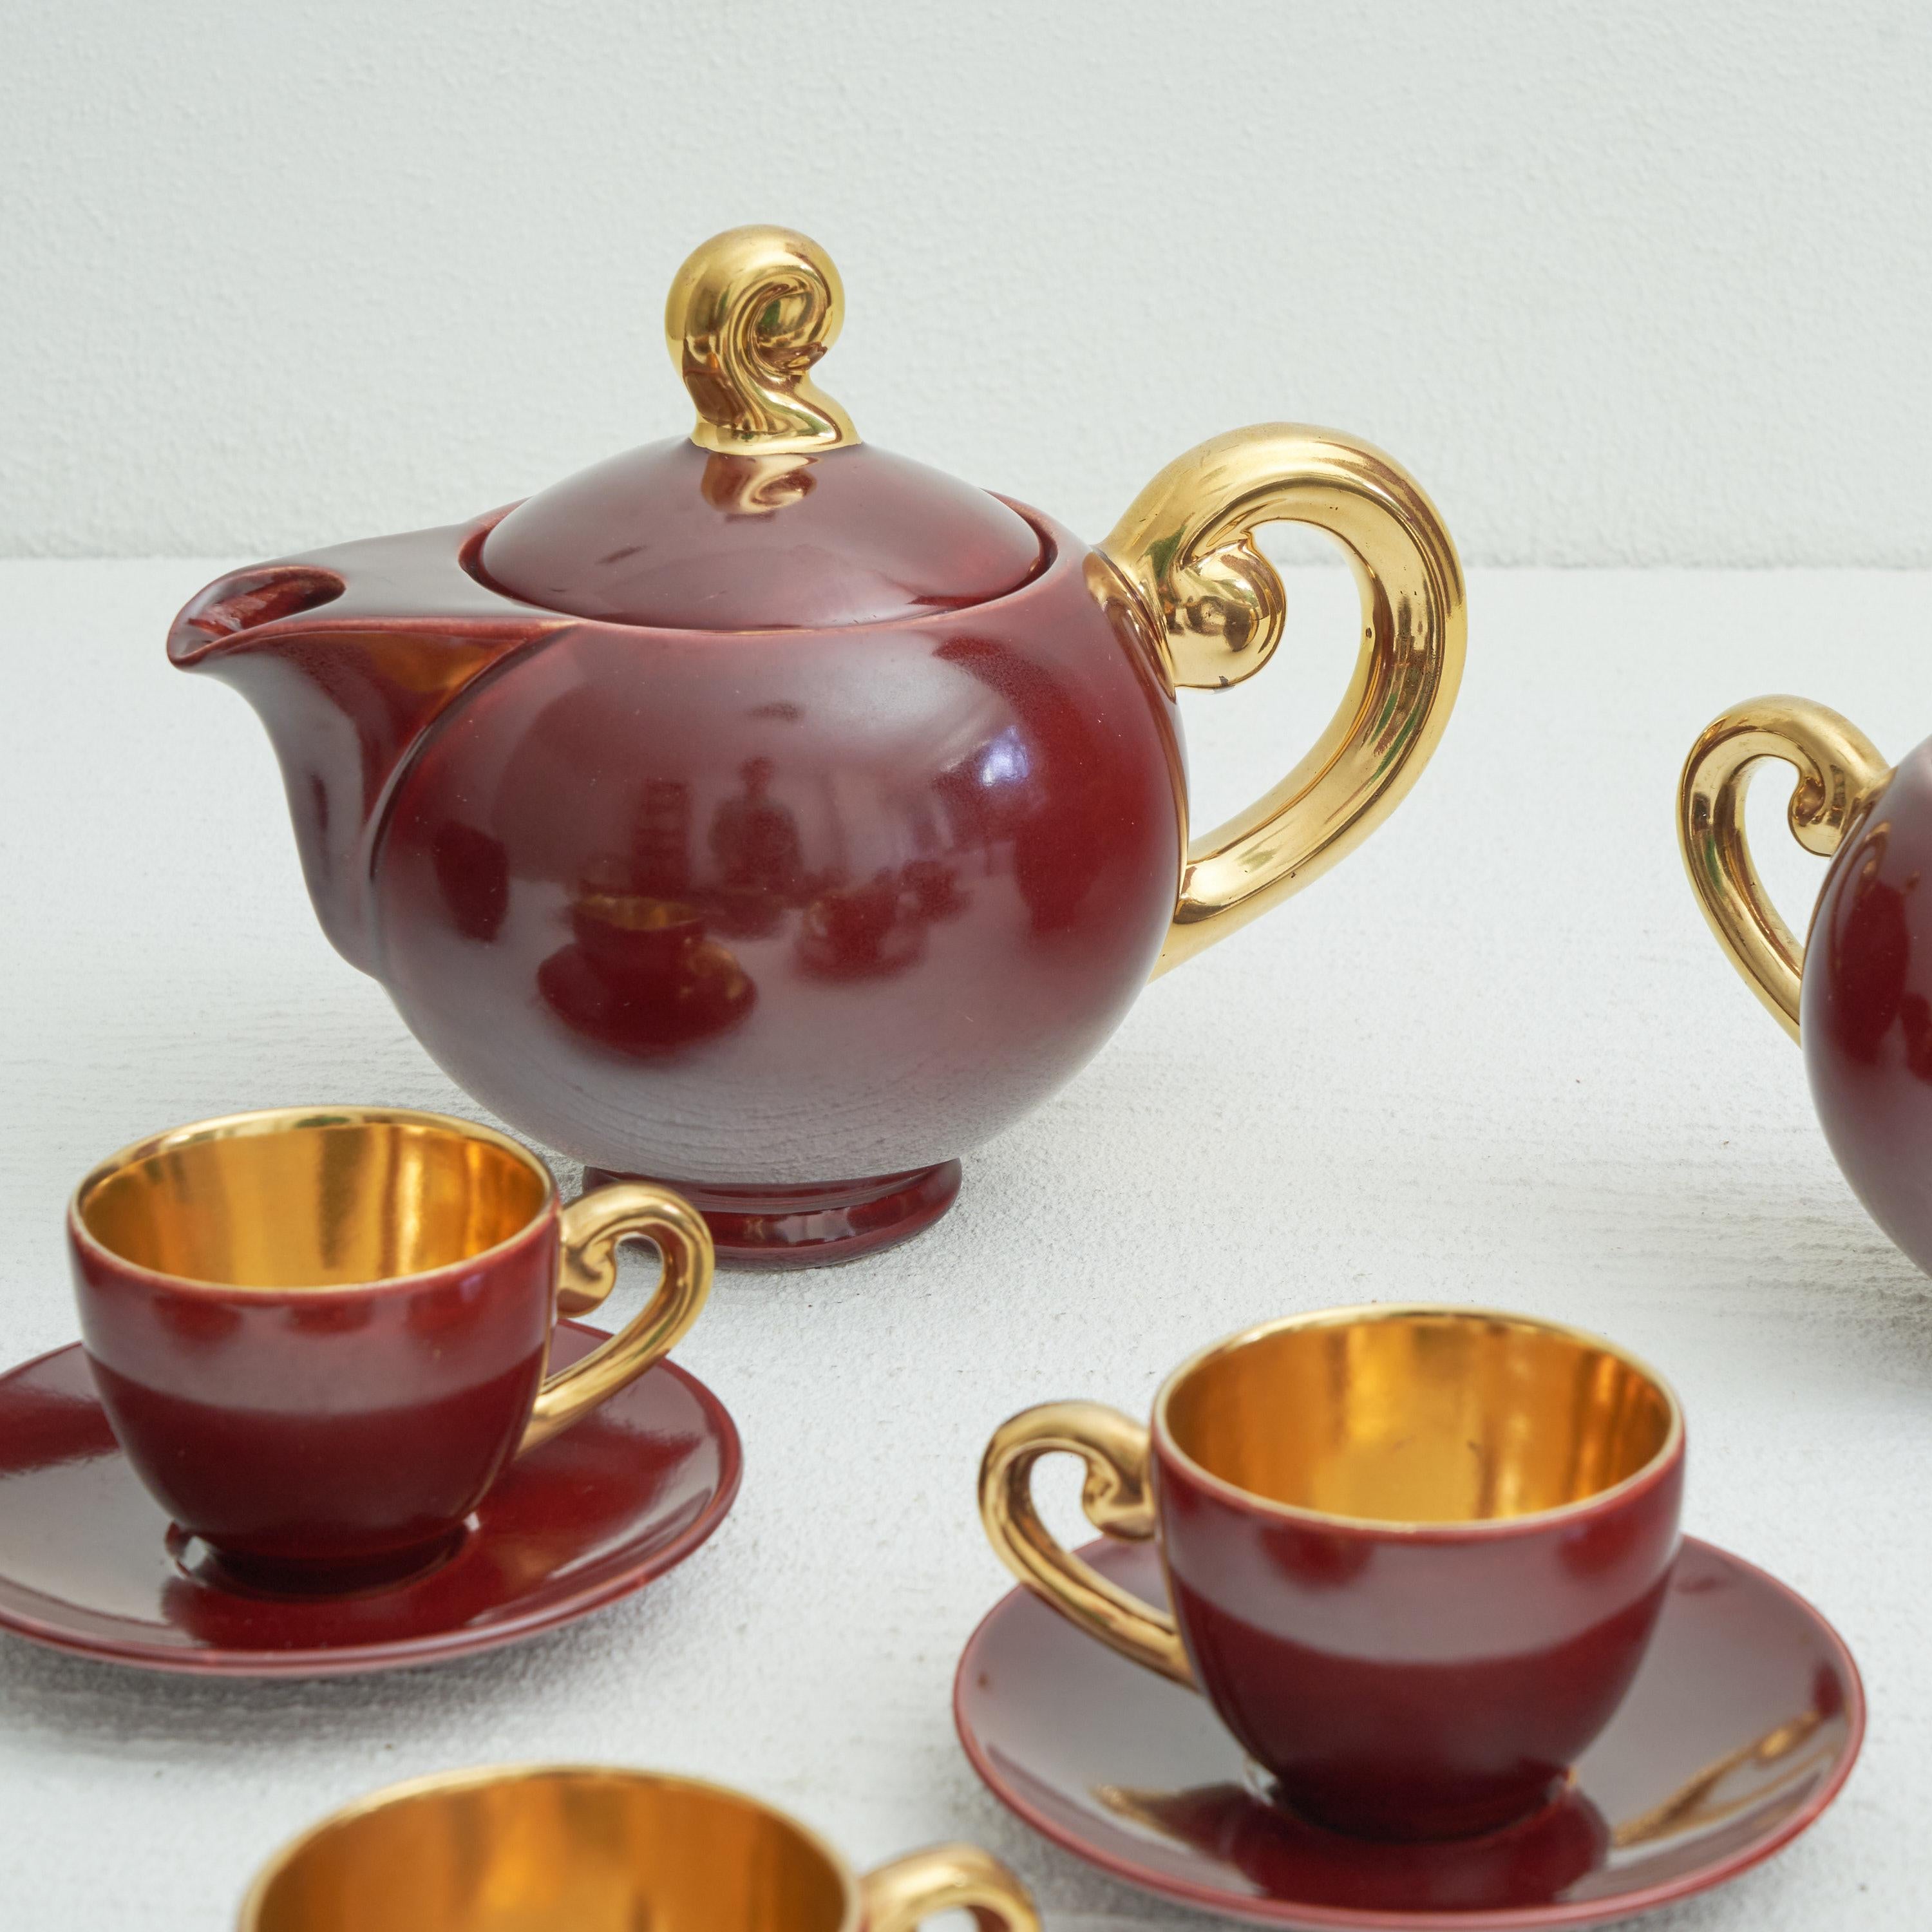 Jules Guérin 'Sang de Boeuf' and Gold Belgian Studio pottery coffee set. Bouffioulx, Belgium, 1960s. 

This is a wonderful and rare coffee set by the famous pottery workshop Guérin, at that time under guidance of Jules Guérin - the son of Roger